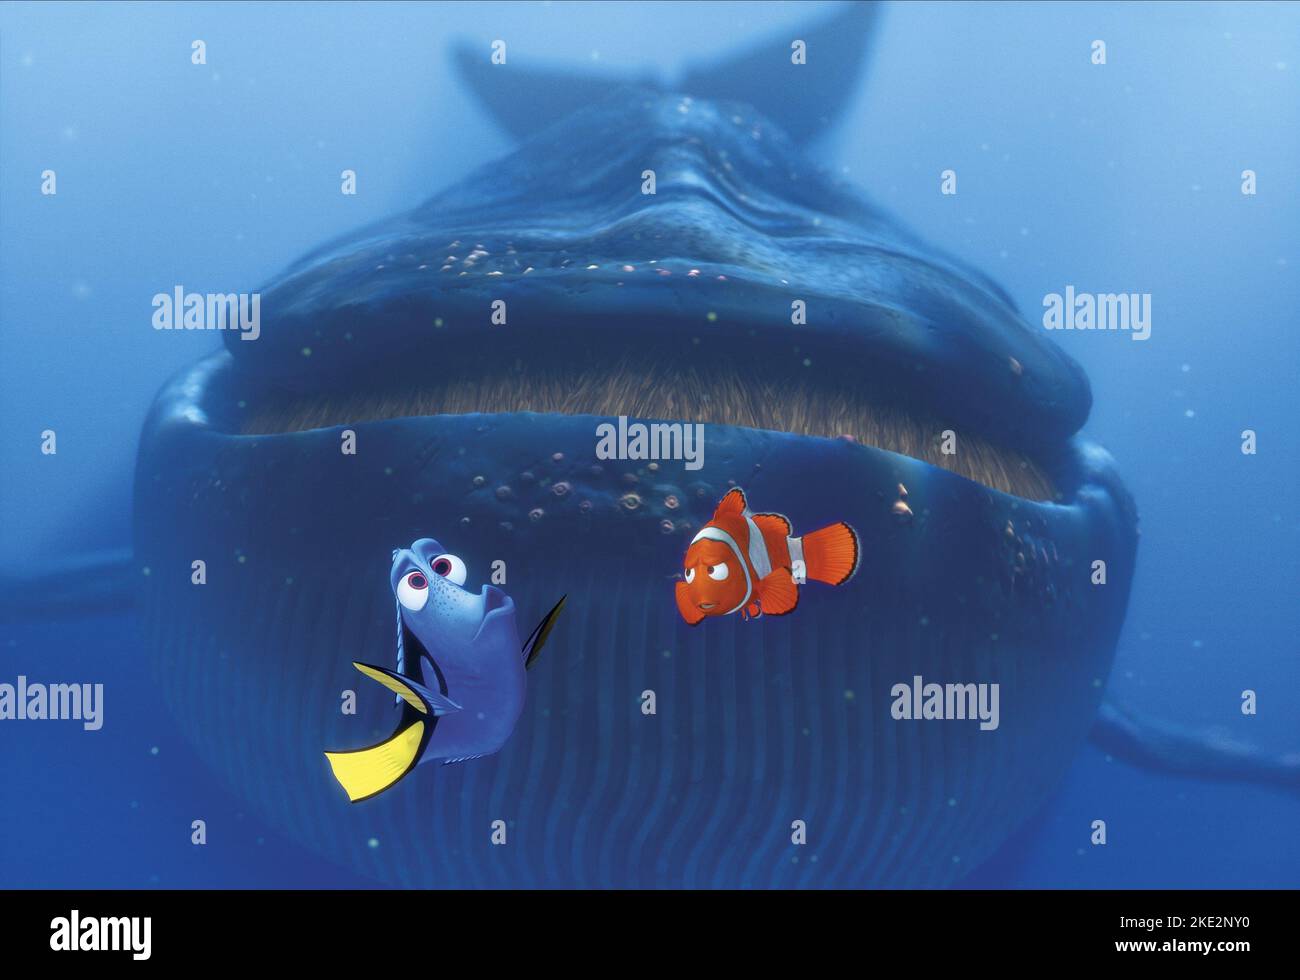 FINDING NEMO, DORY, MARLIN, BLUE WHALE, 2003 Stock Photo